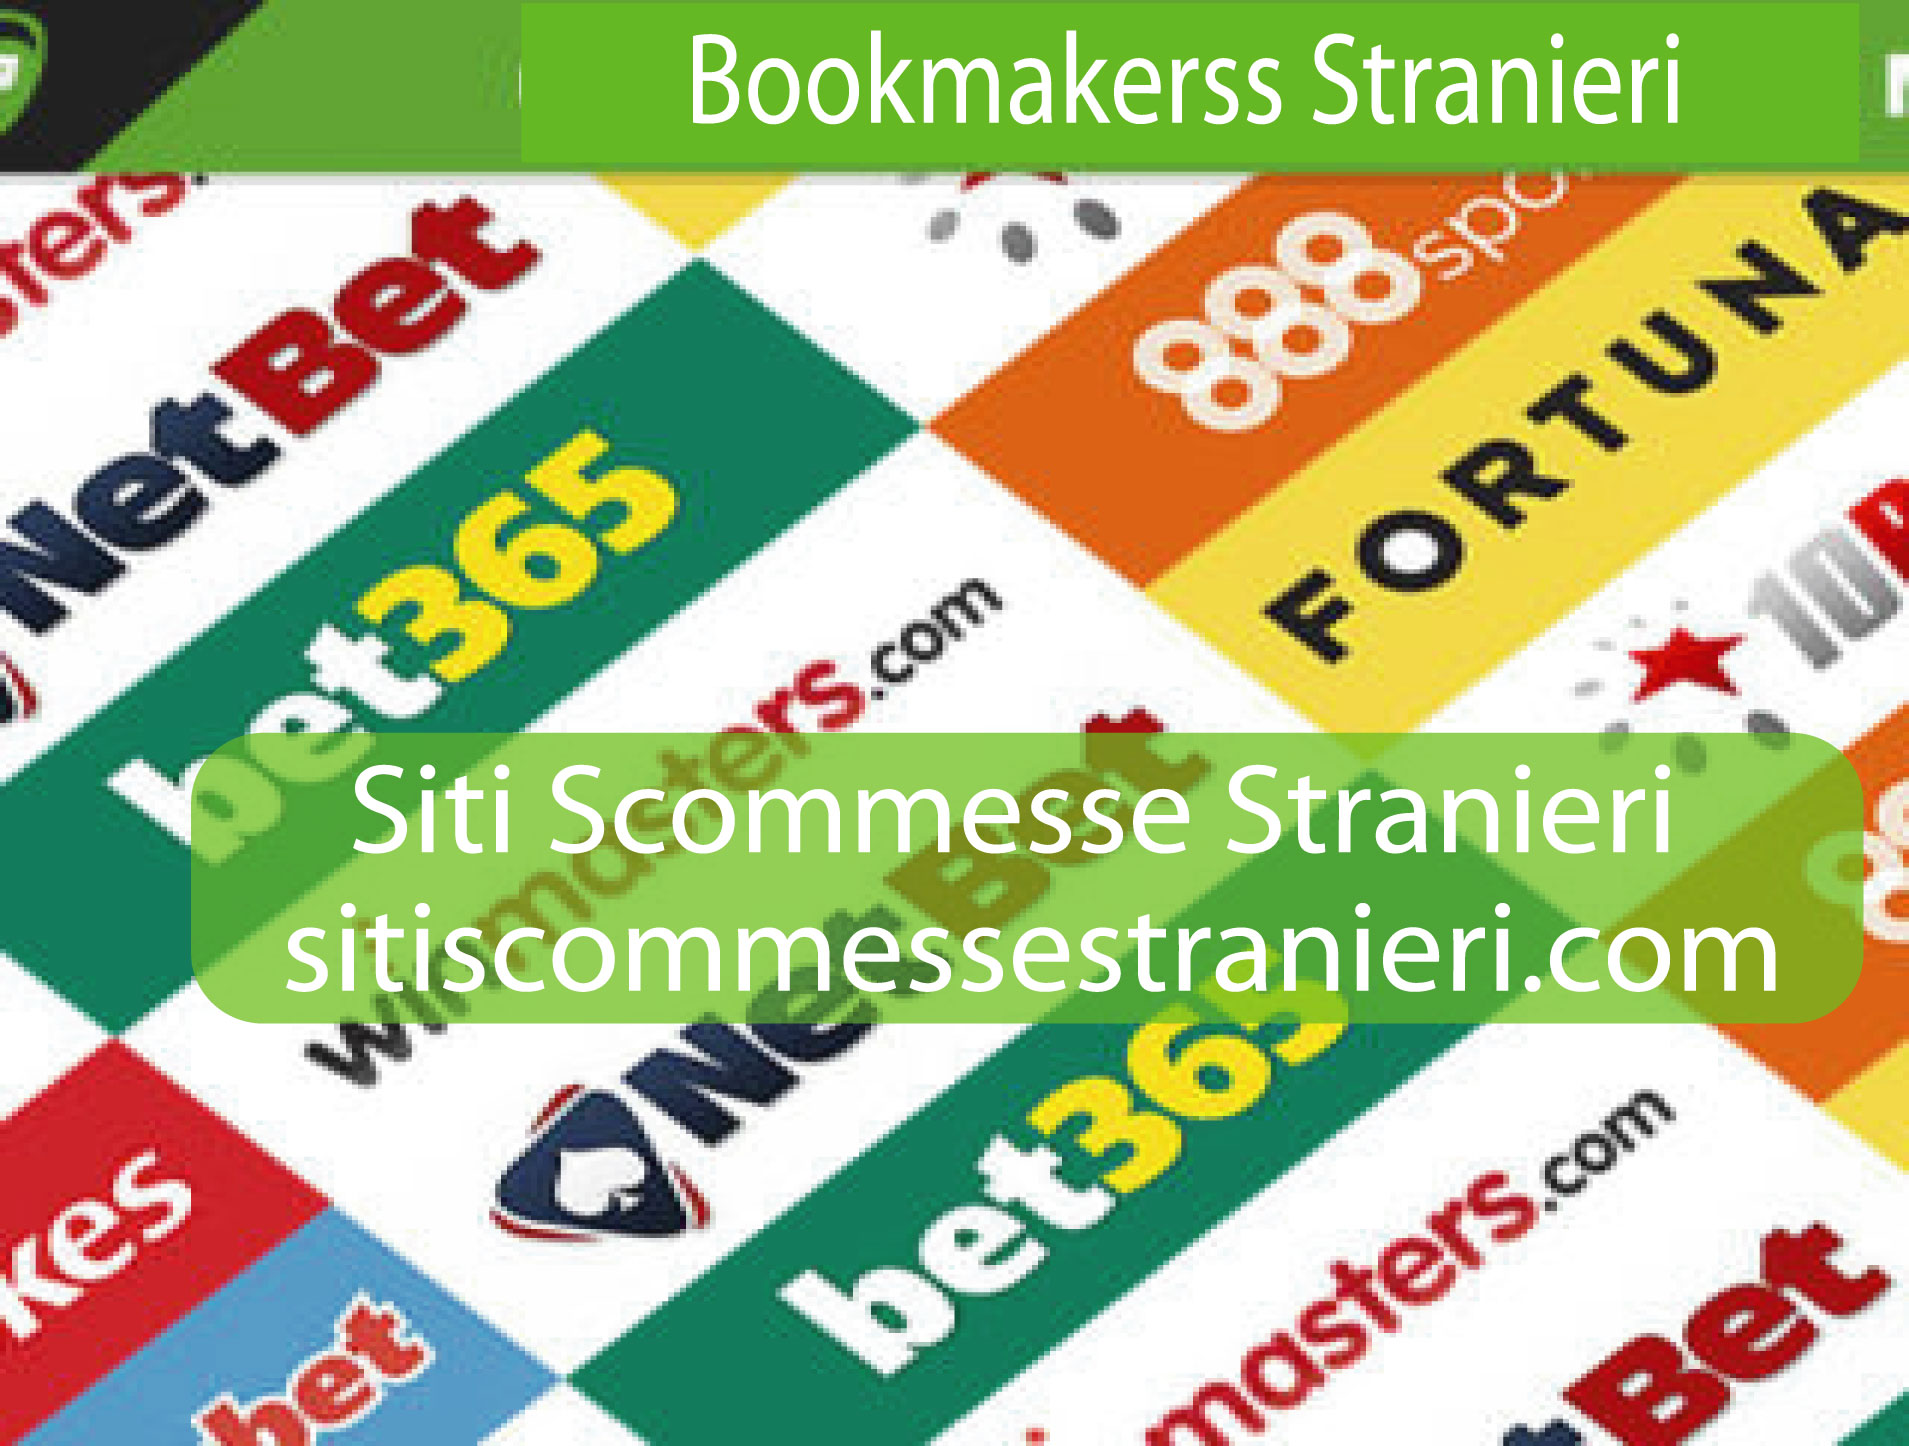 Top Choices of Bookmakers Stranieri Betting Sites Italy